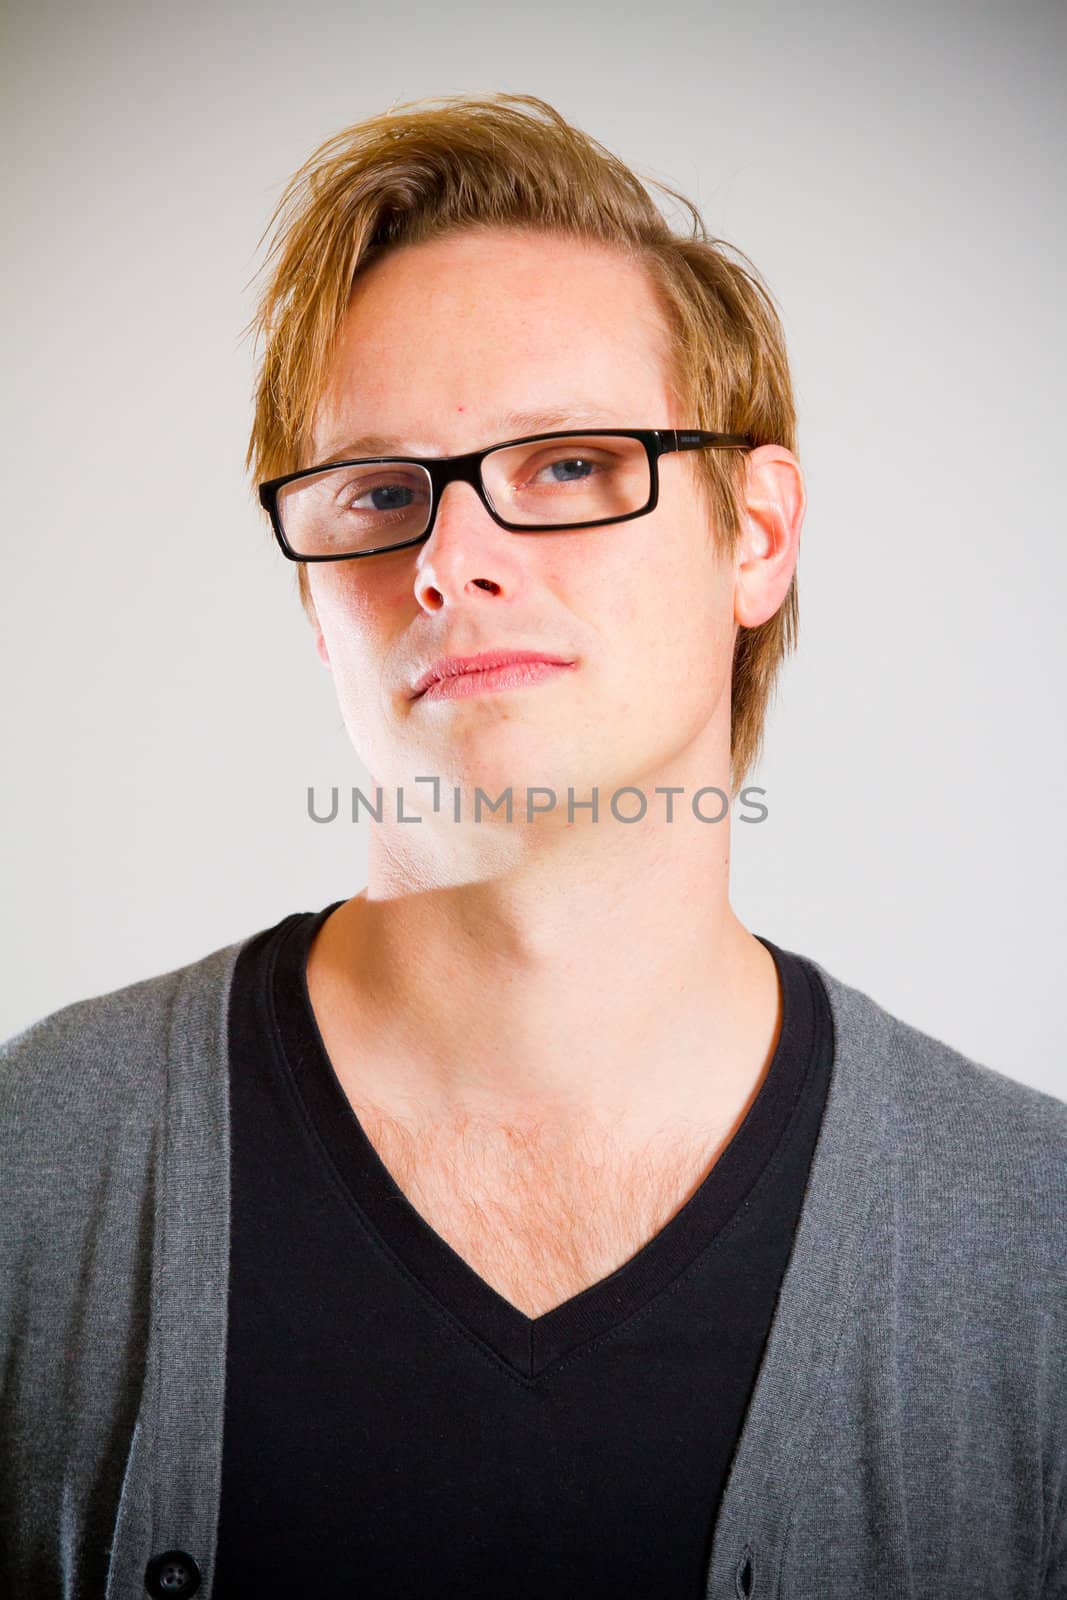 This contemporary style portrait of a man wearing a black shirt and a grey cardigan sweater while wearing glasses in the studio.